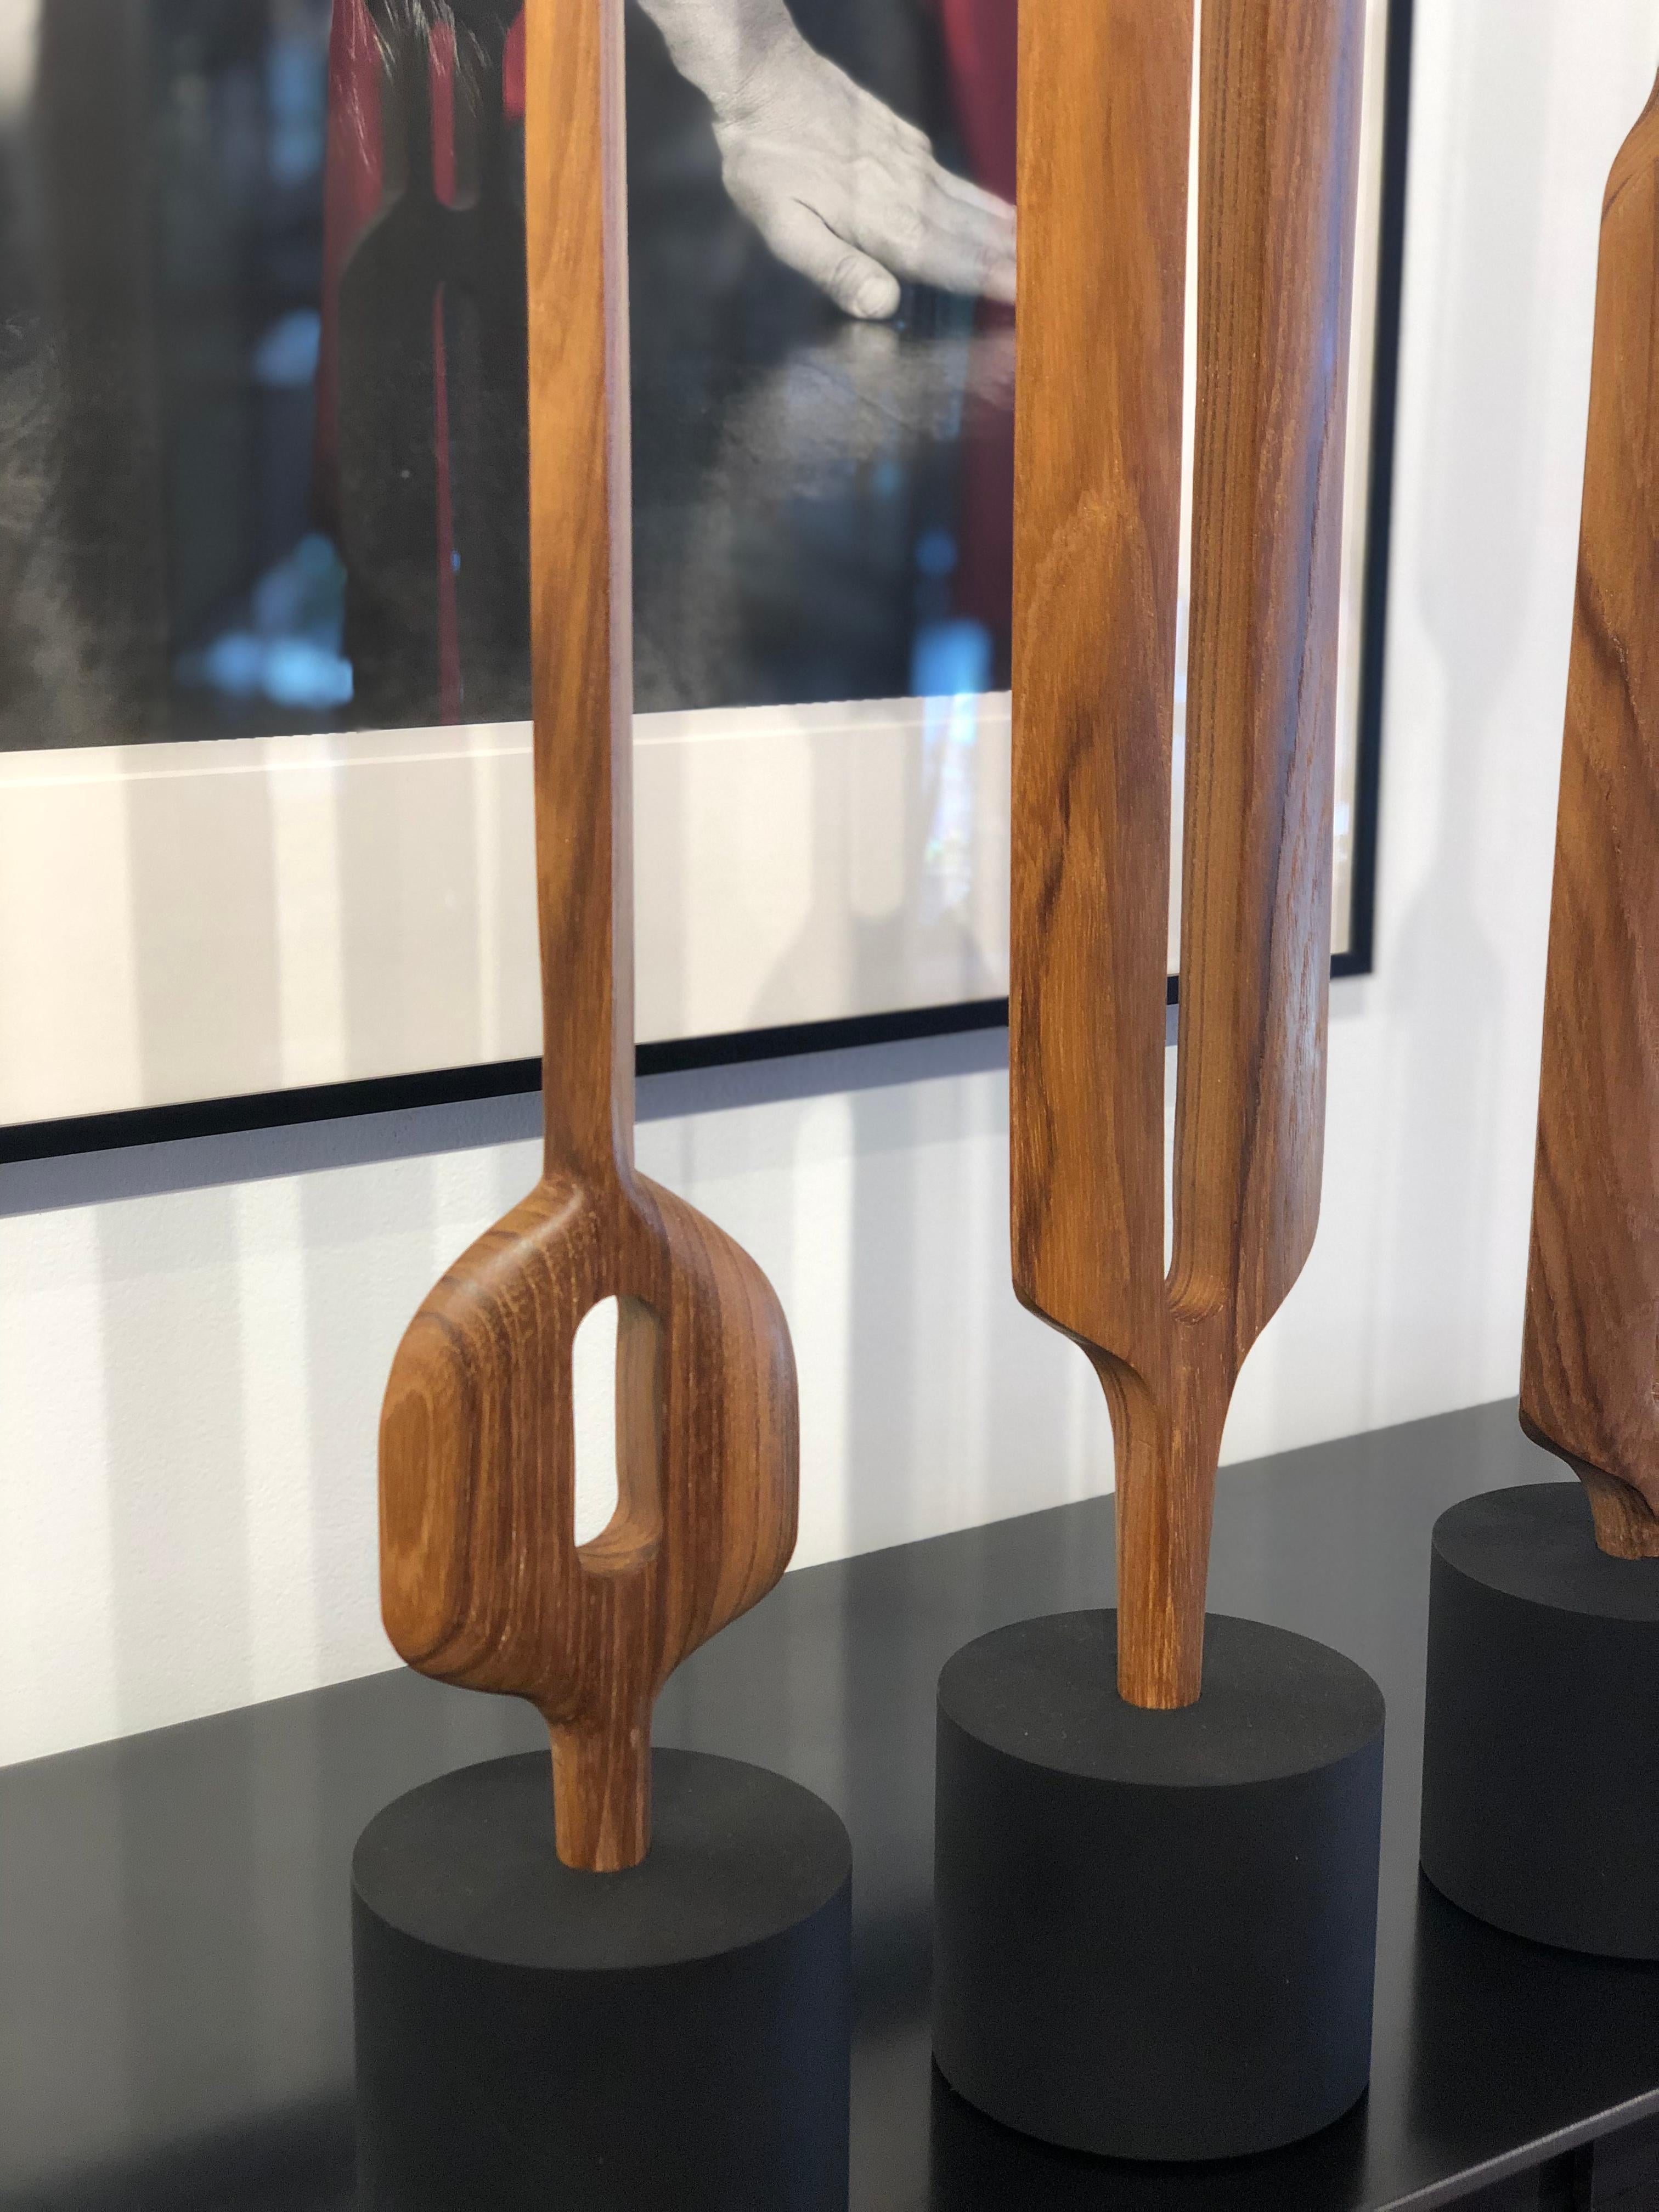 Teak is a dense tropical hardwood with a gray to brown color and finely textured with a tight grain and smooth surface when polished. These hand carved and shaped totem sculptures bring out the natural beauty of the wood's graceful structure. Each